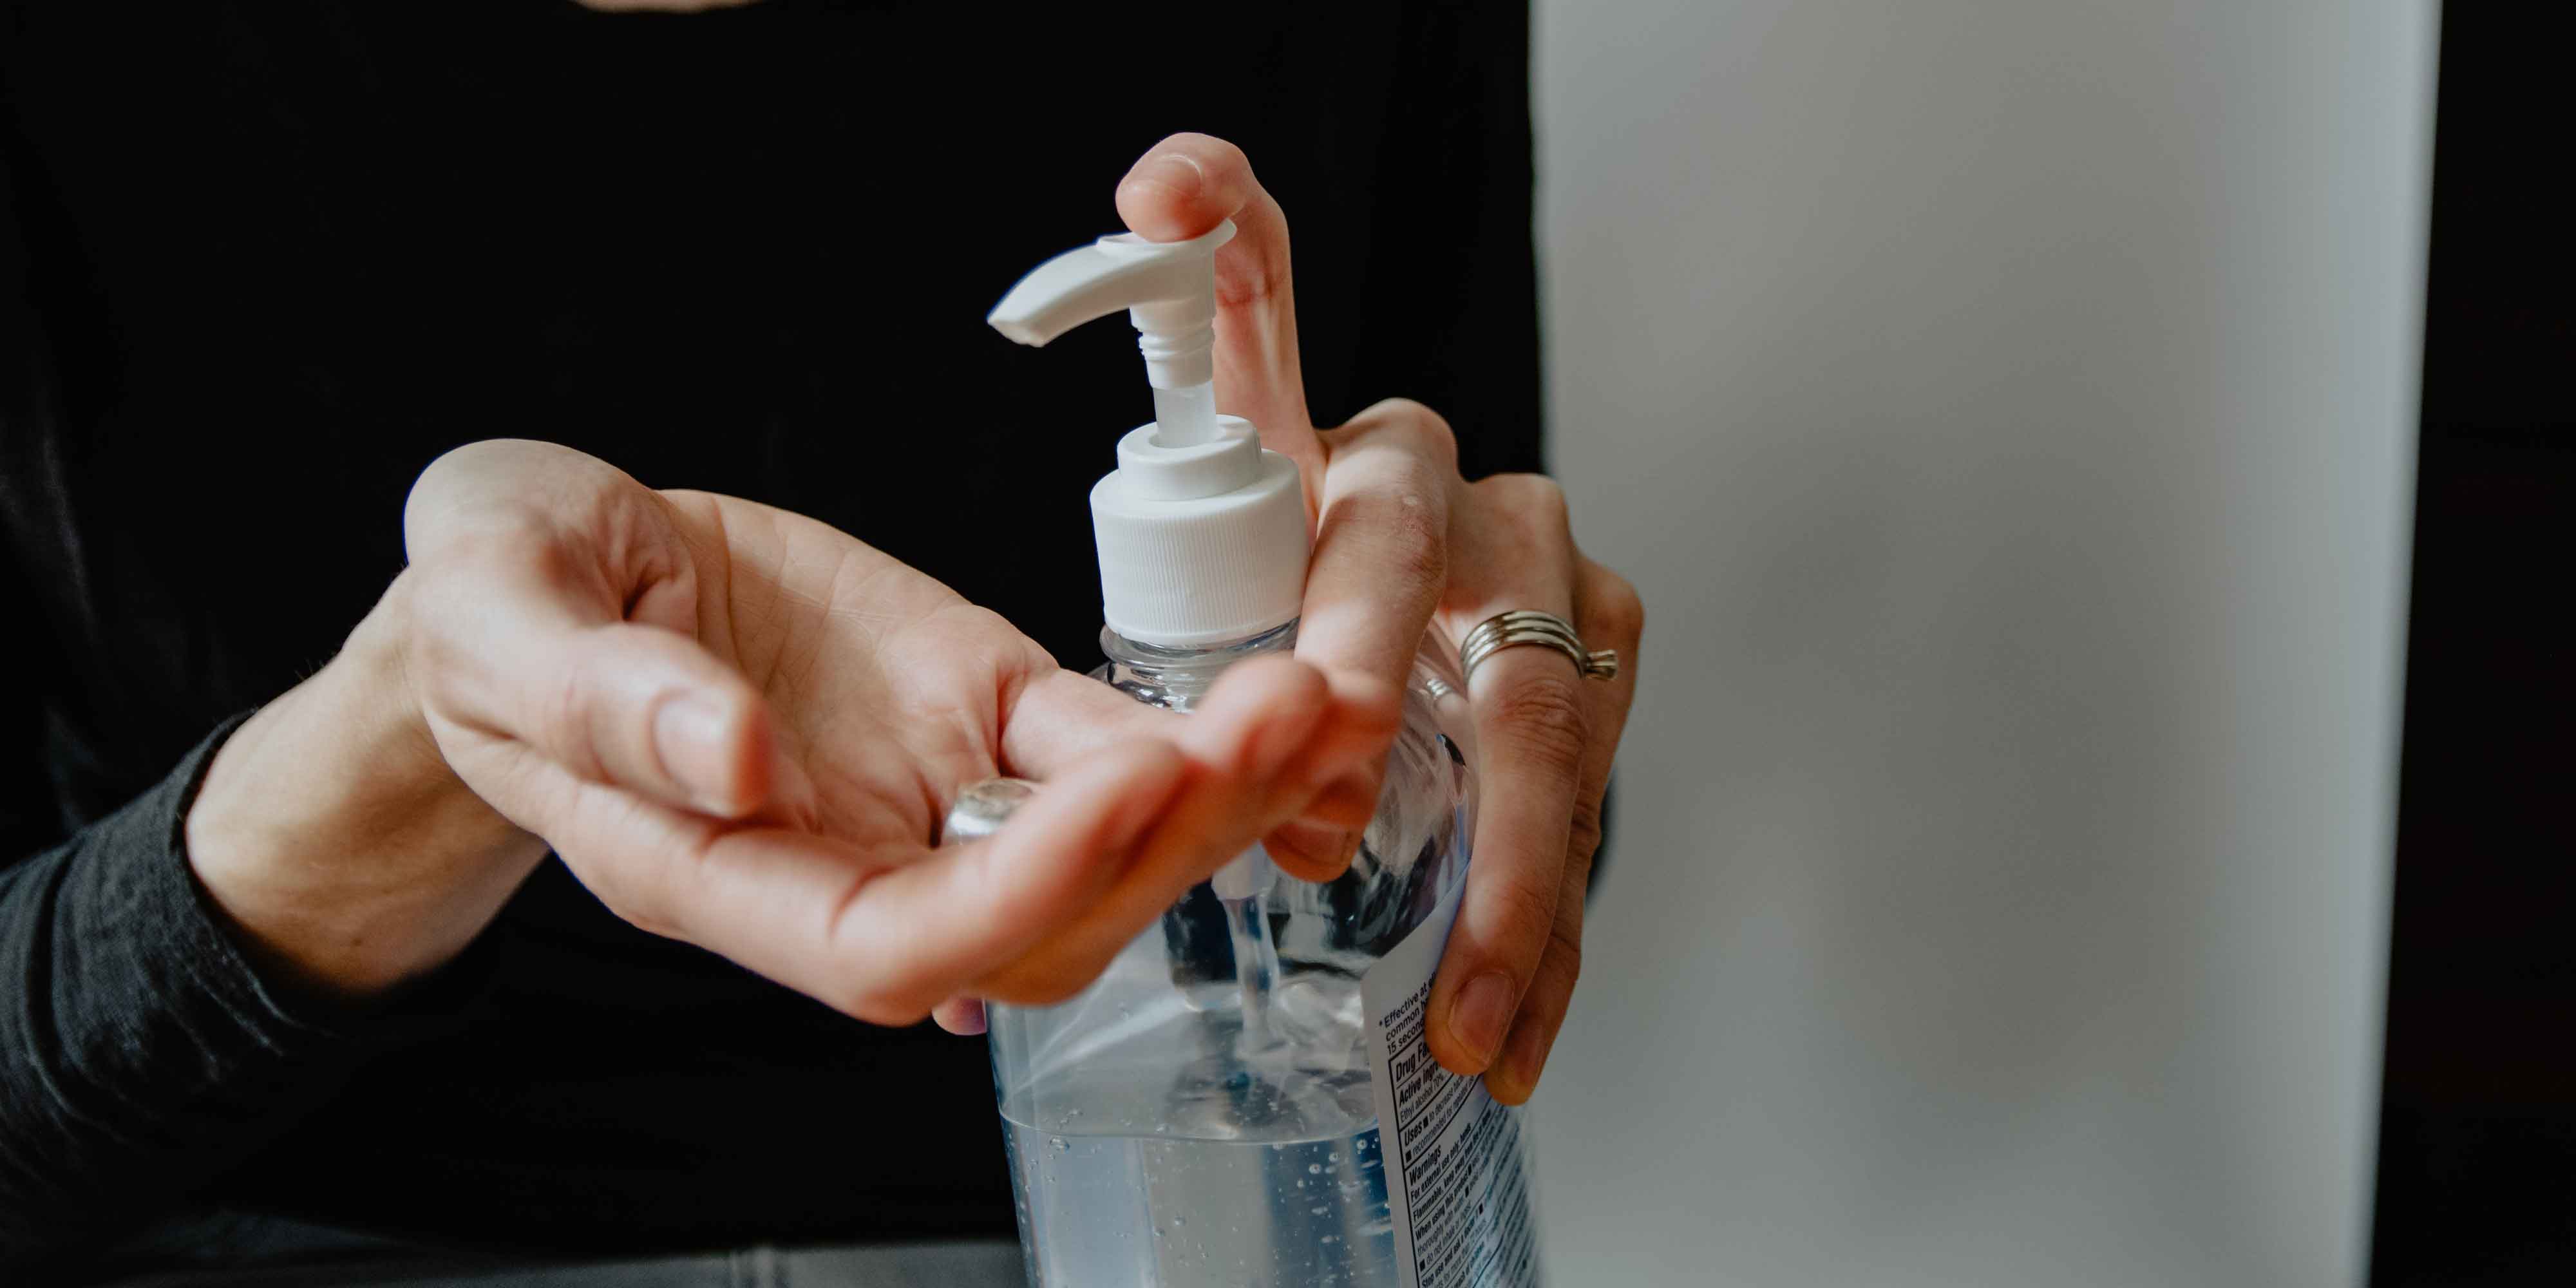 A person pumping hand sanitizer 